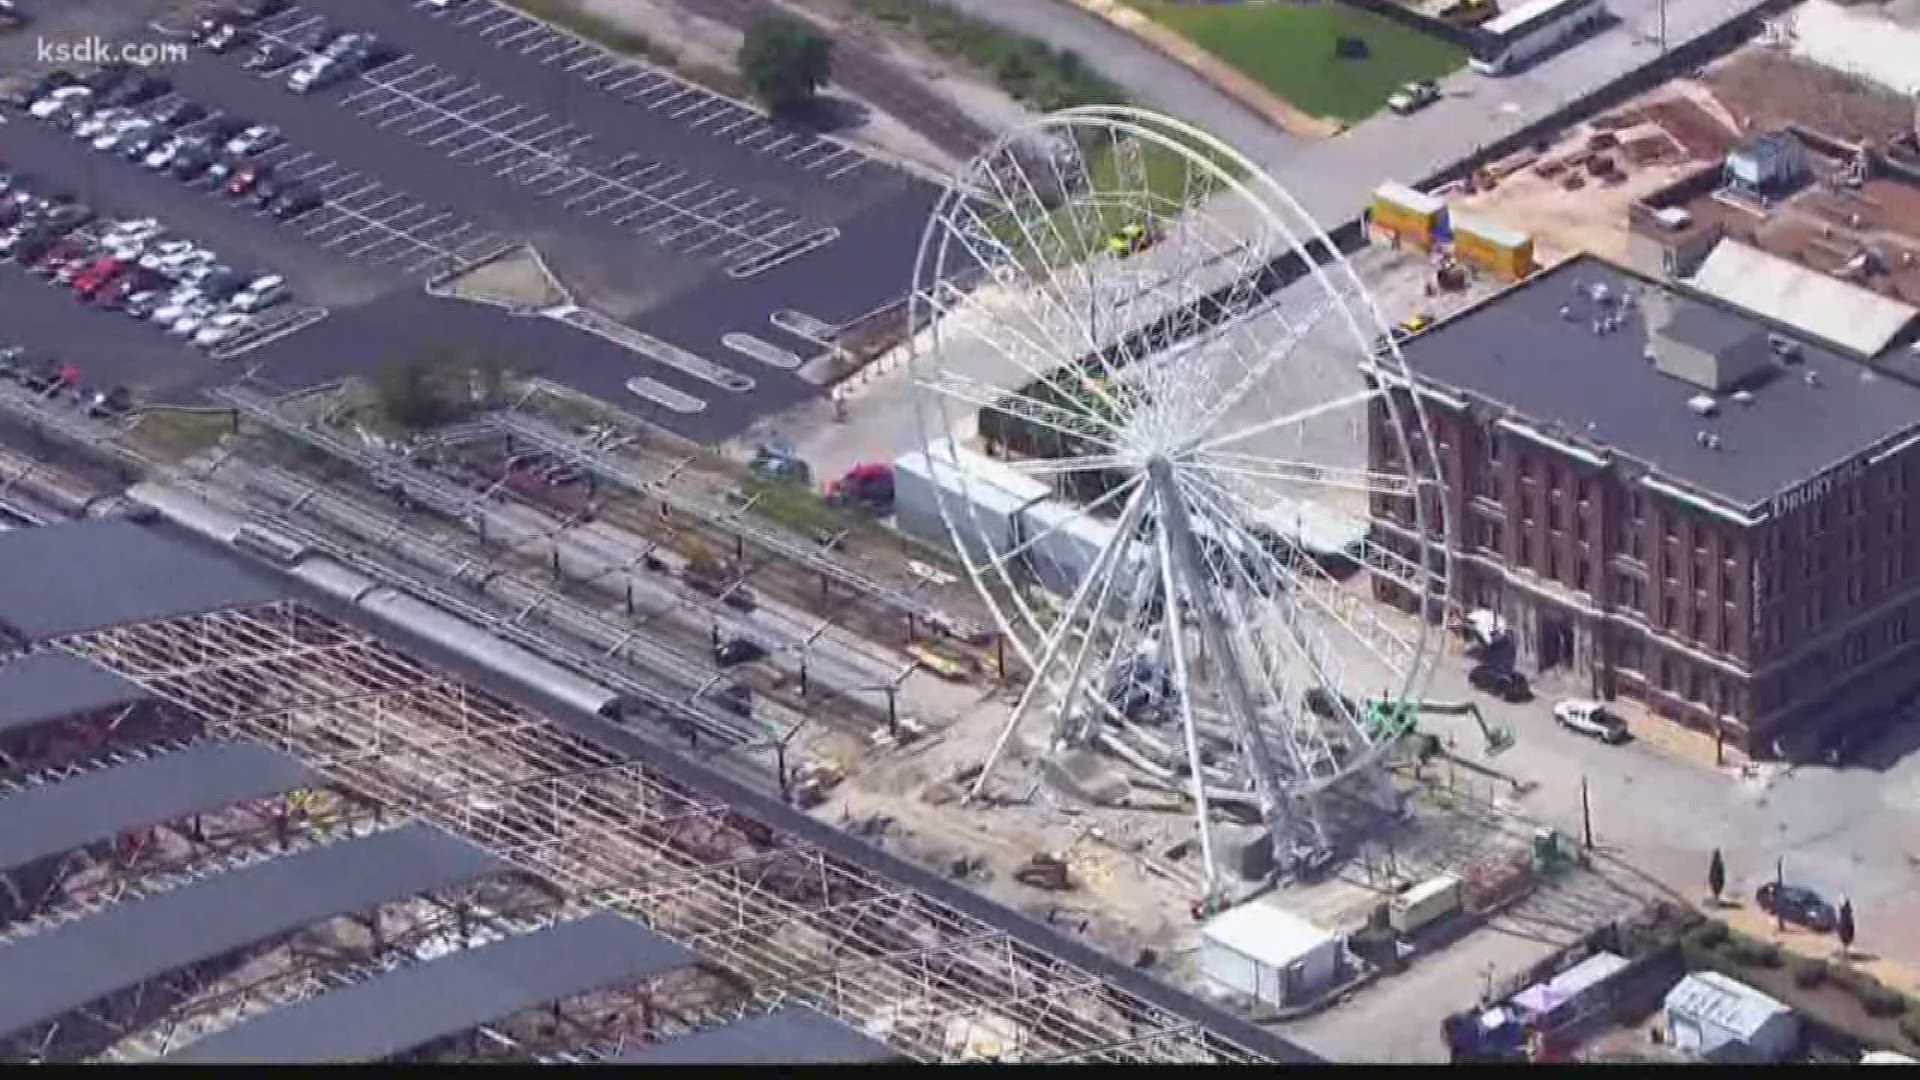 Don’t make the mistake of calling this a Ferris wheel. "Since it has enclosed gondolas it’s an observation wheel."